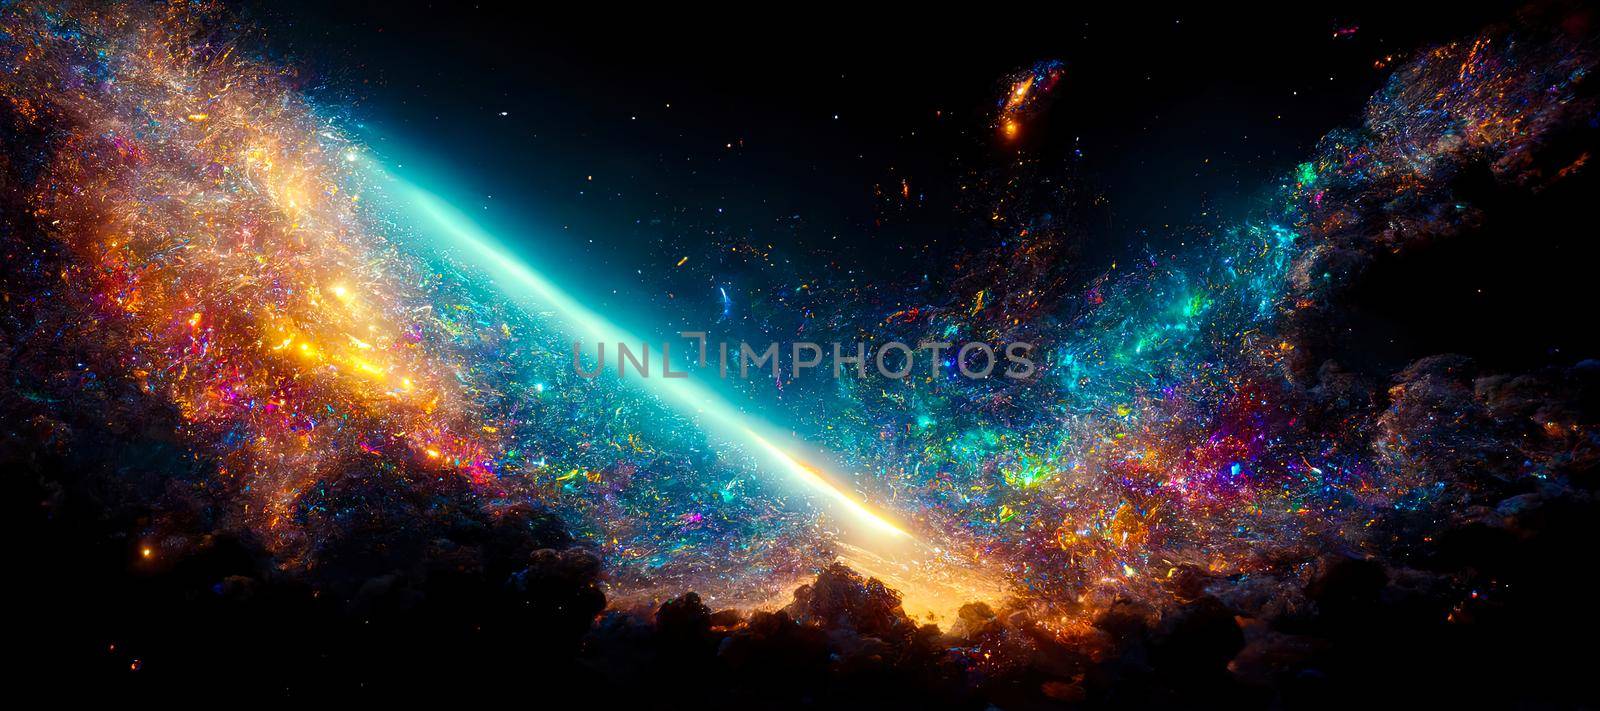 Star Cluster And Nebula In Space by TRMK